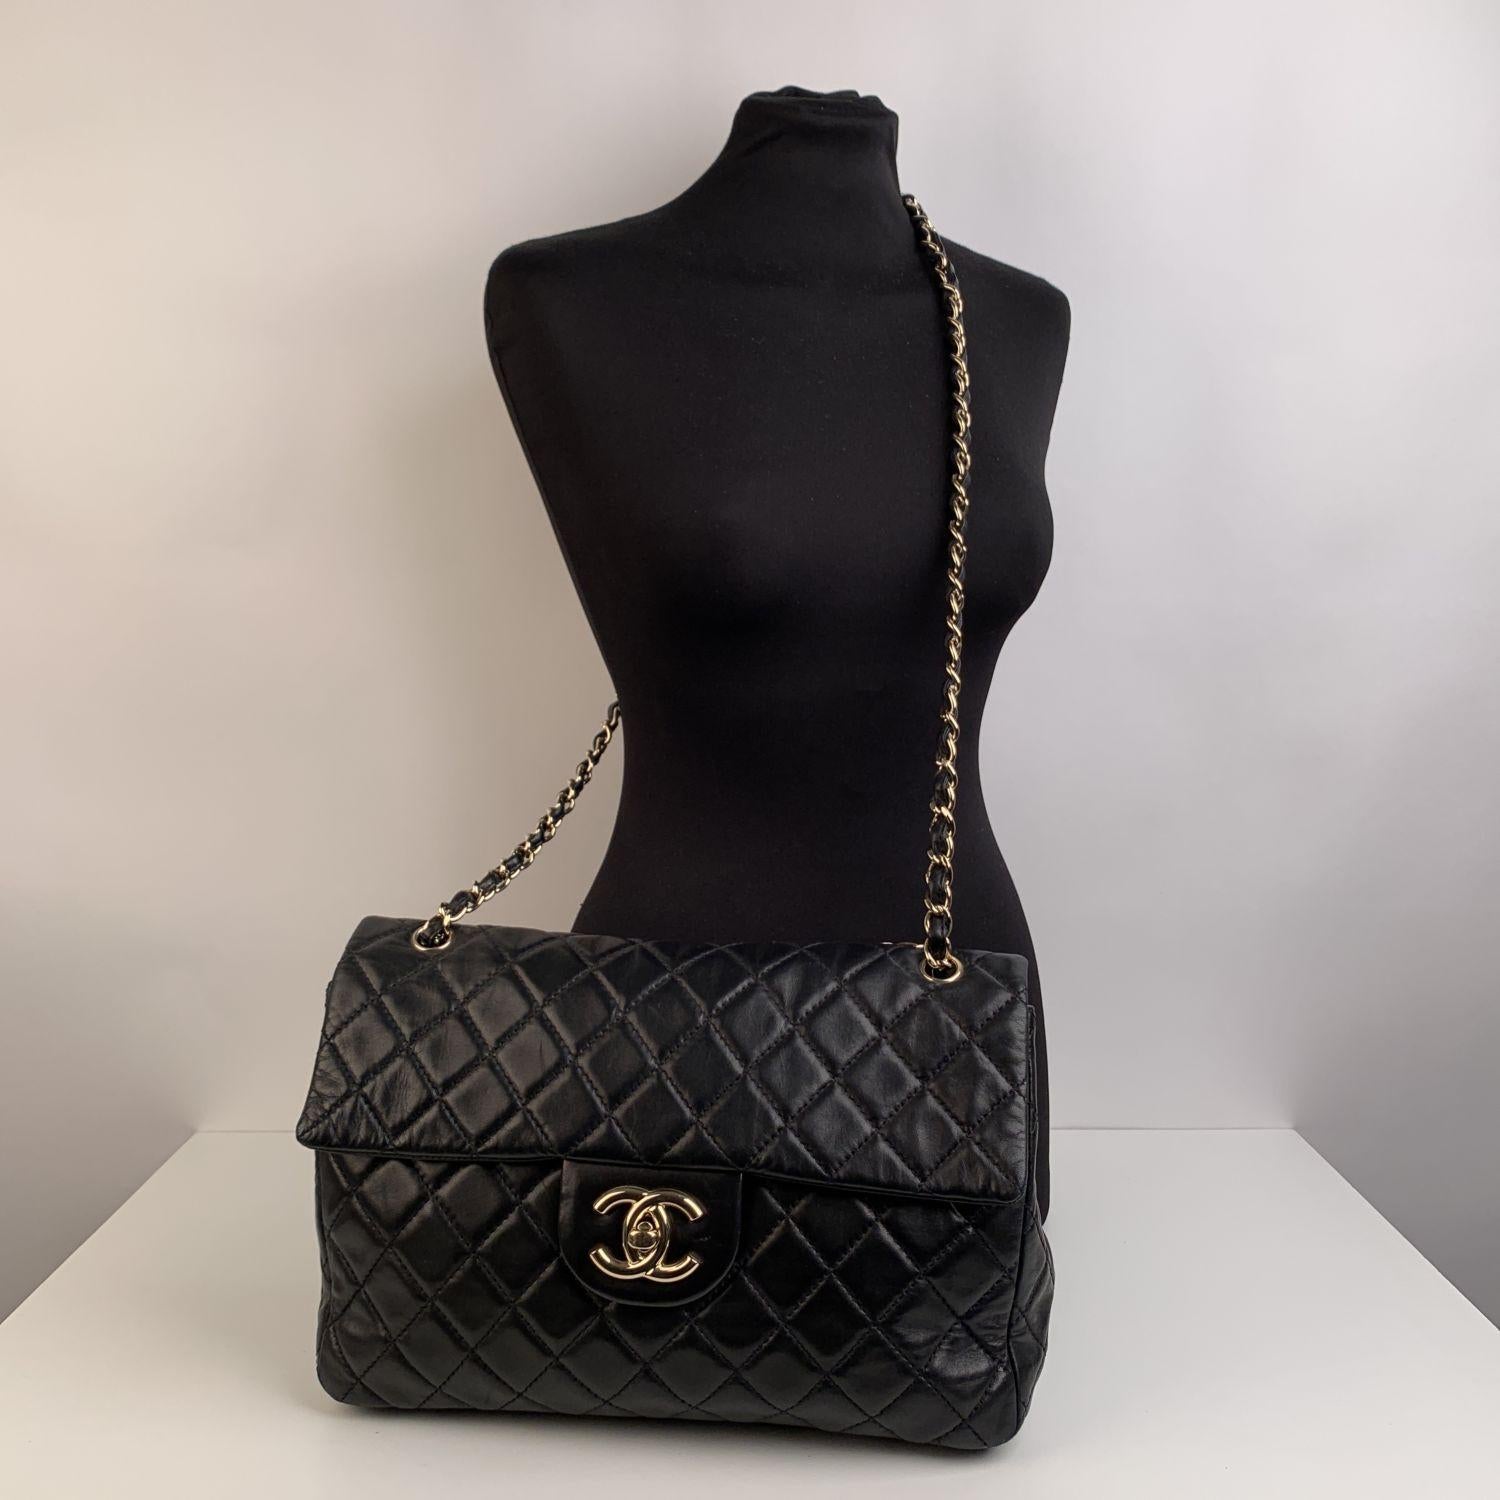 Women's Chanel Black Quilted Leather Jumbo Classic Flap 2.55 Shoulder Bag